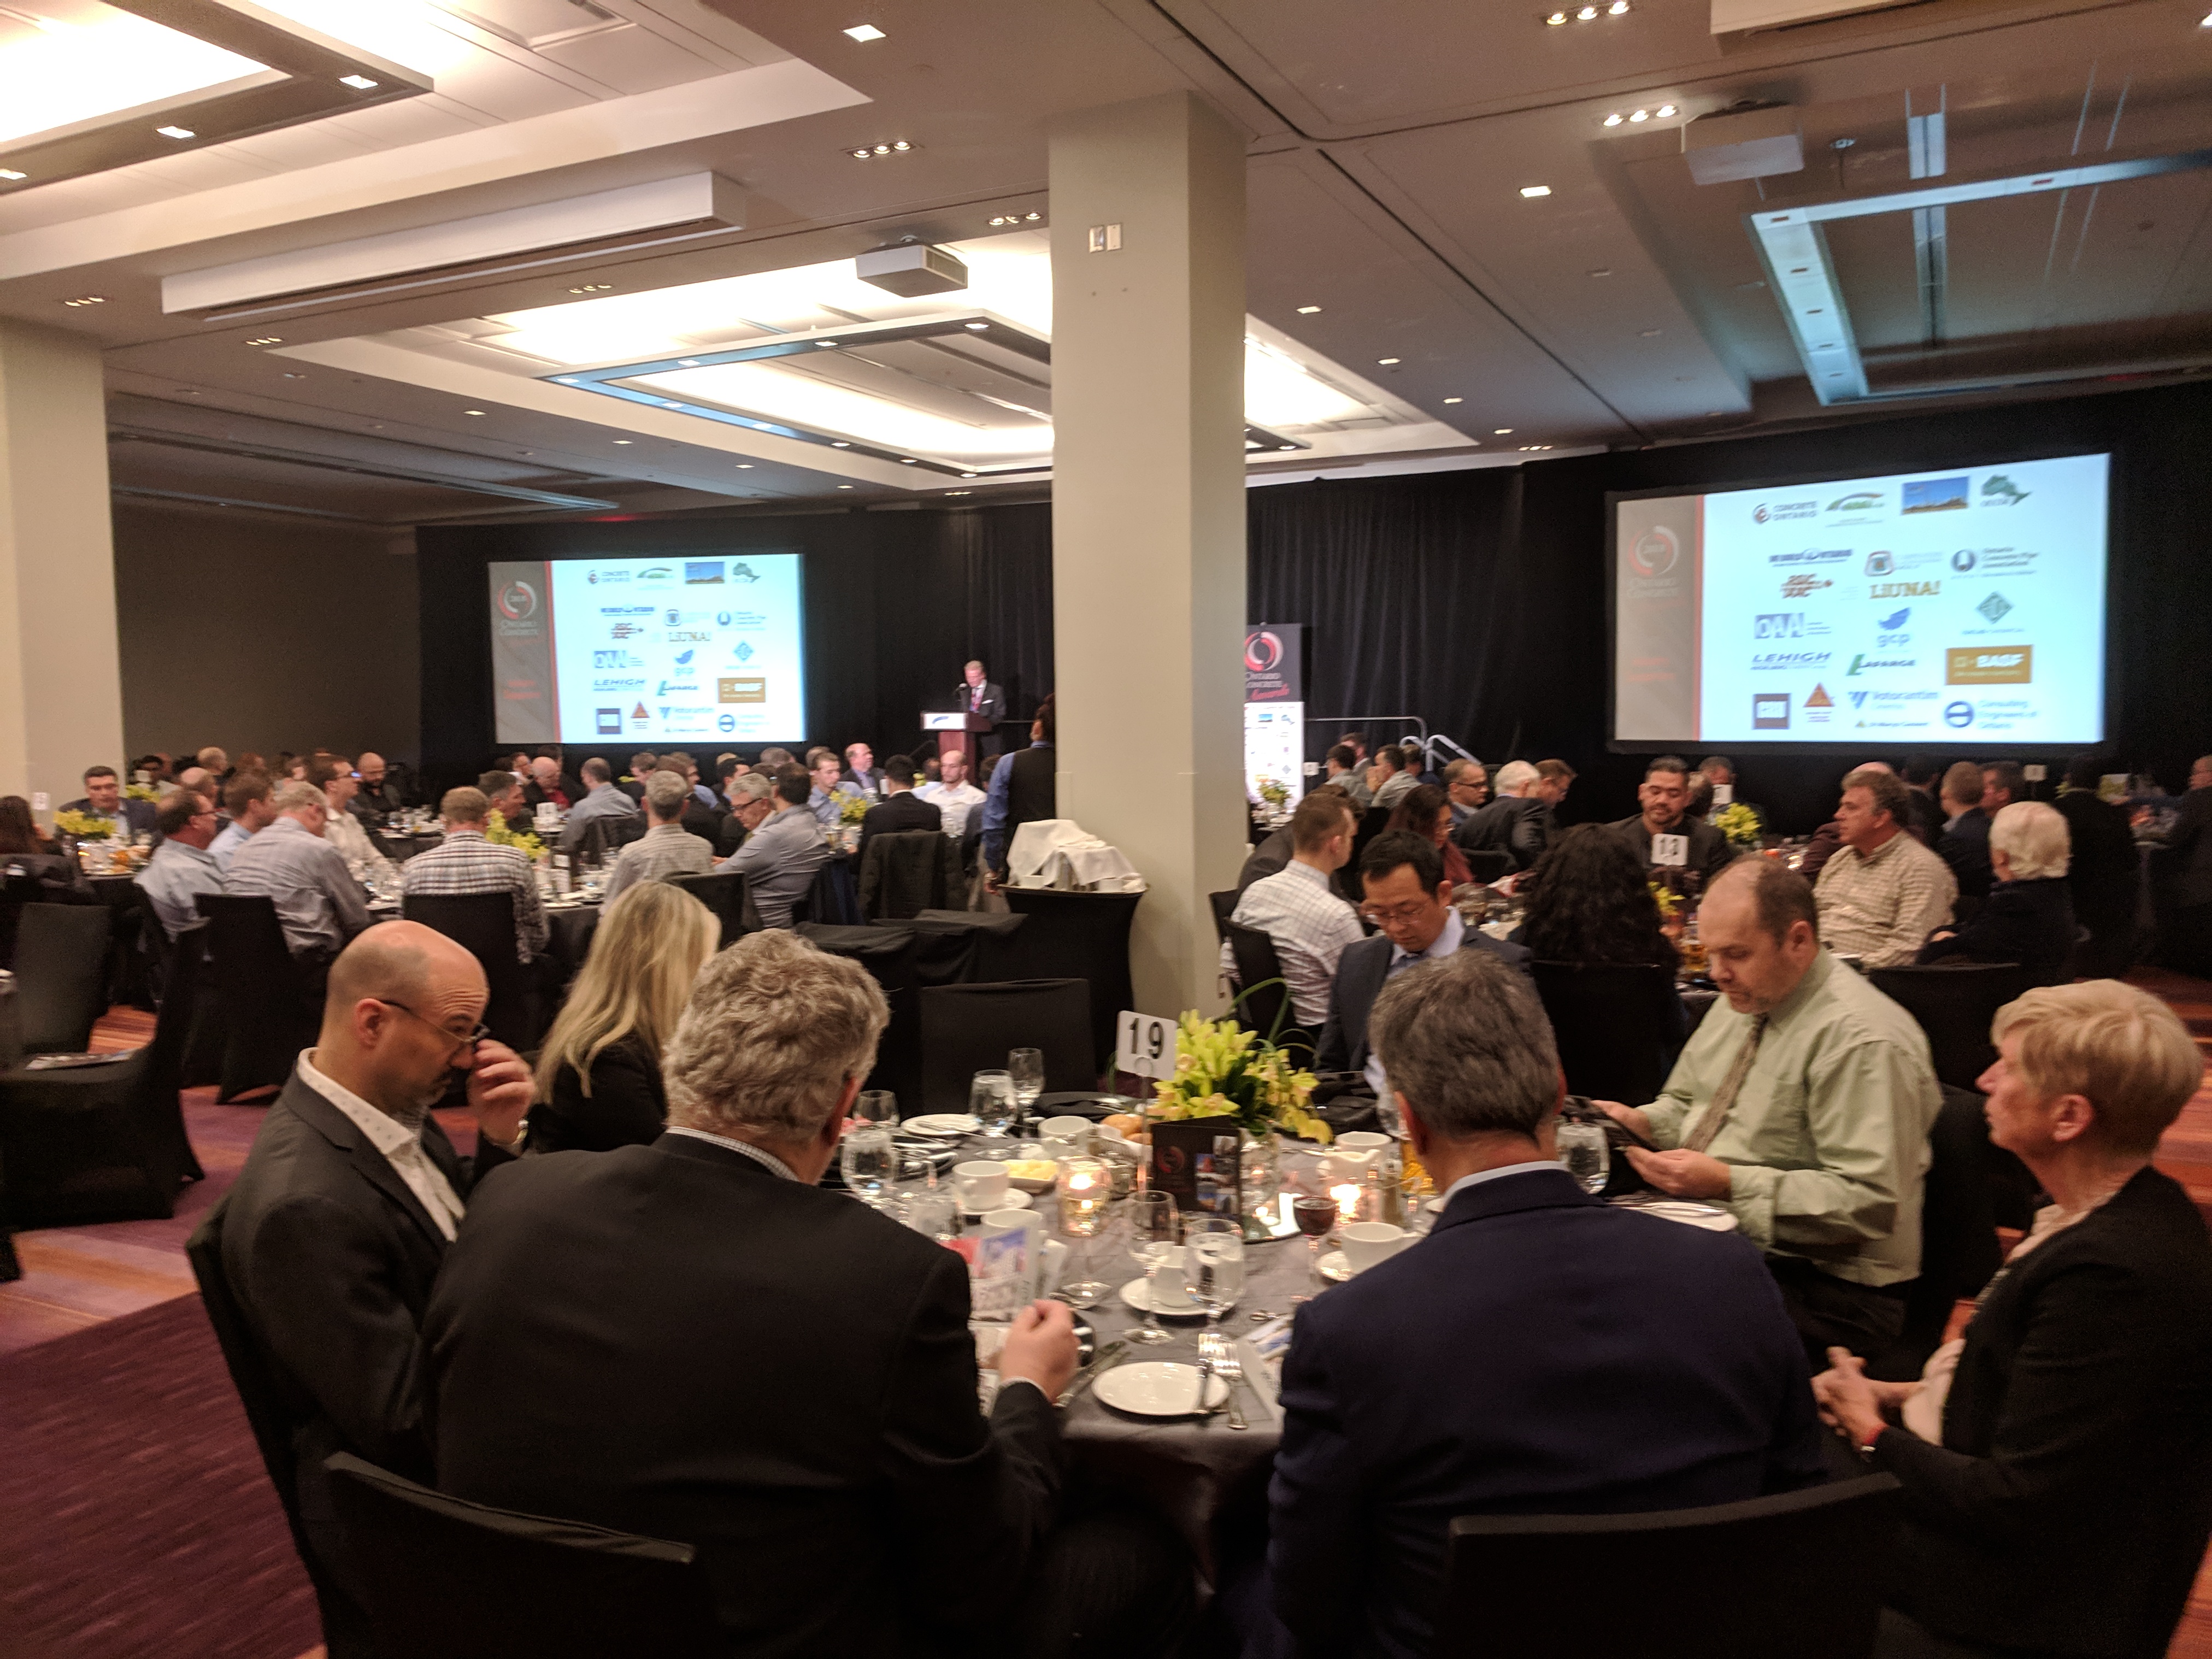 2018 Ontario Concrete Awards highlight innovation and sustainability